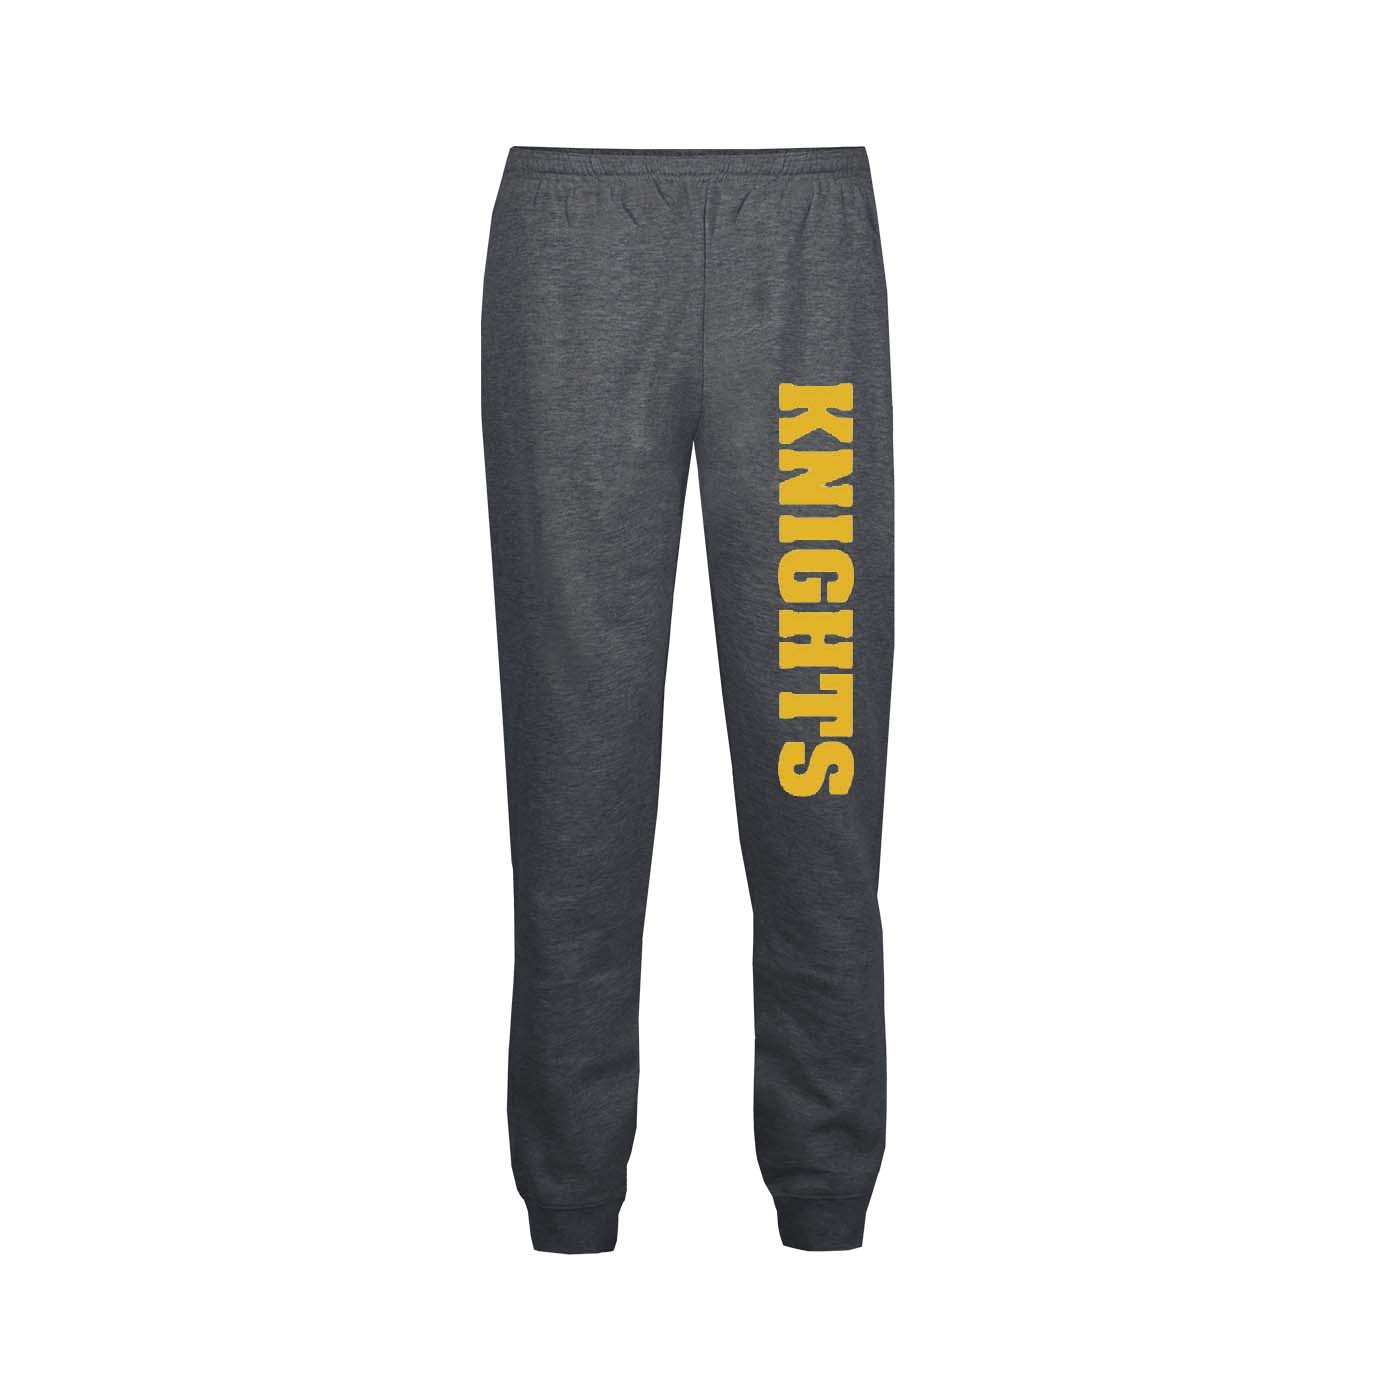 ANN Spirit Performance Joggers w/ Knight Logo - Please Allow 2-3 Weeks for Delivery